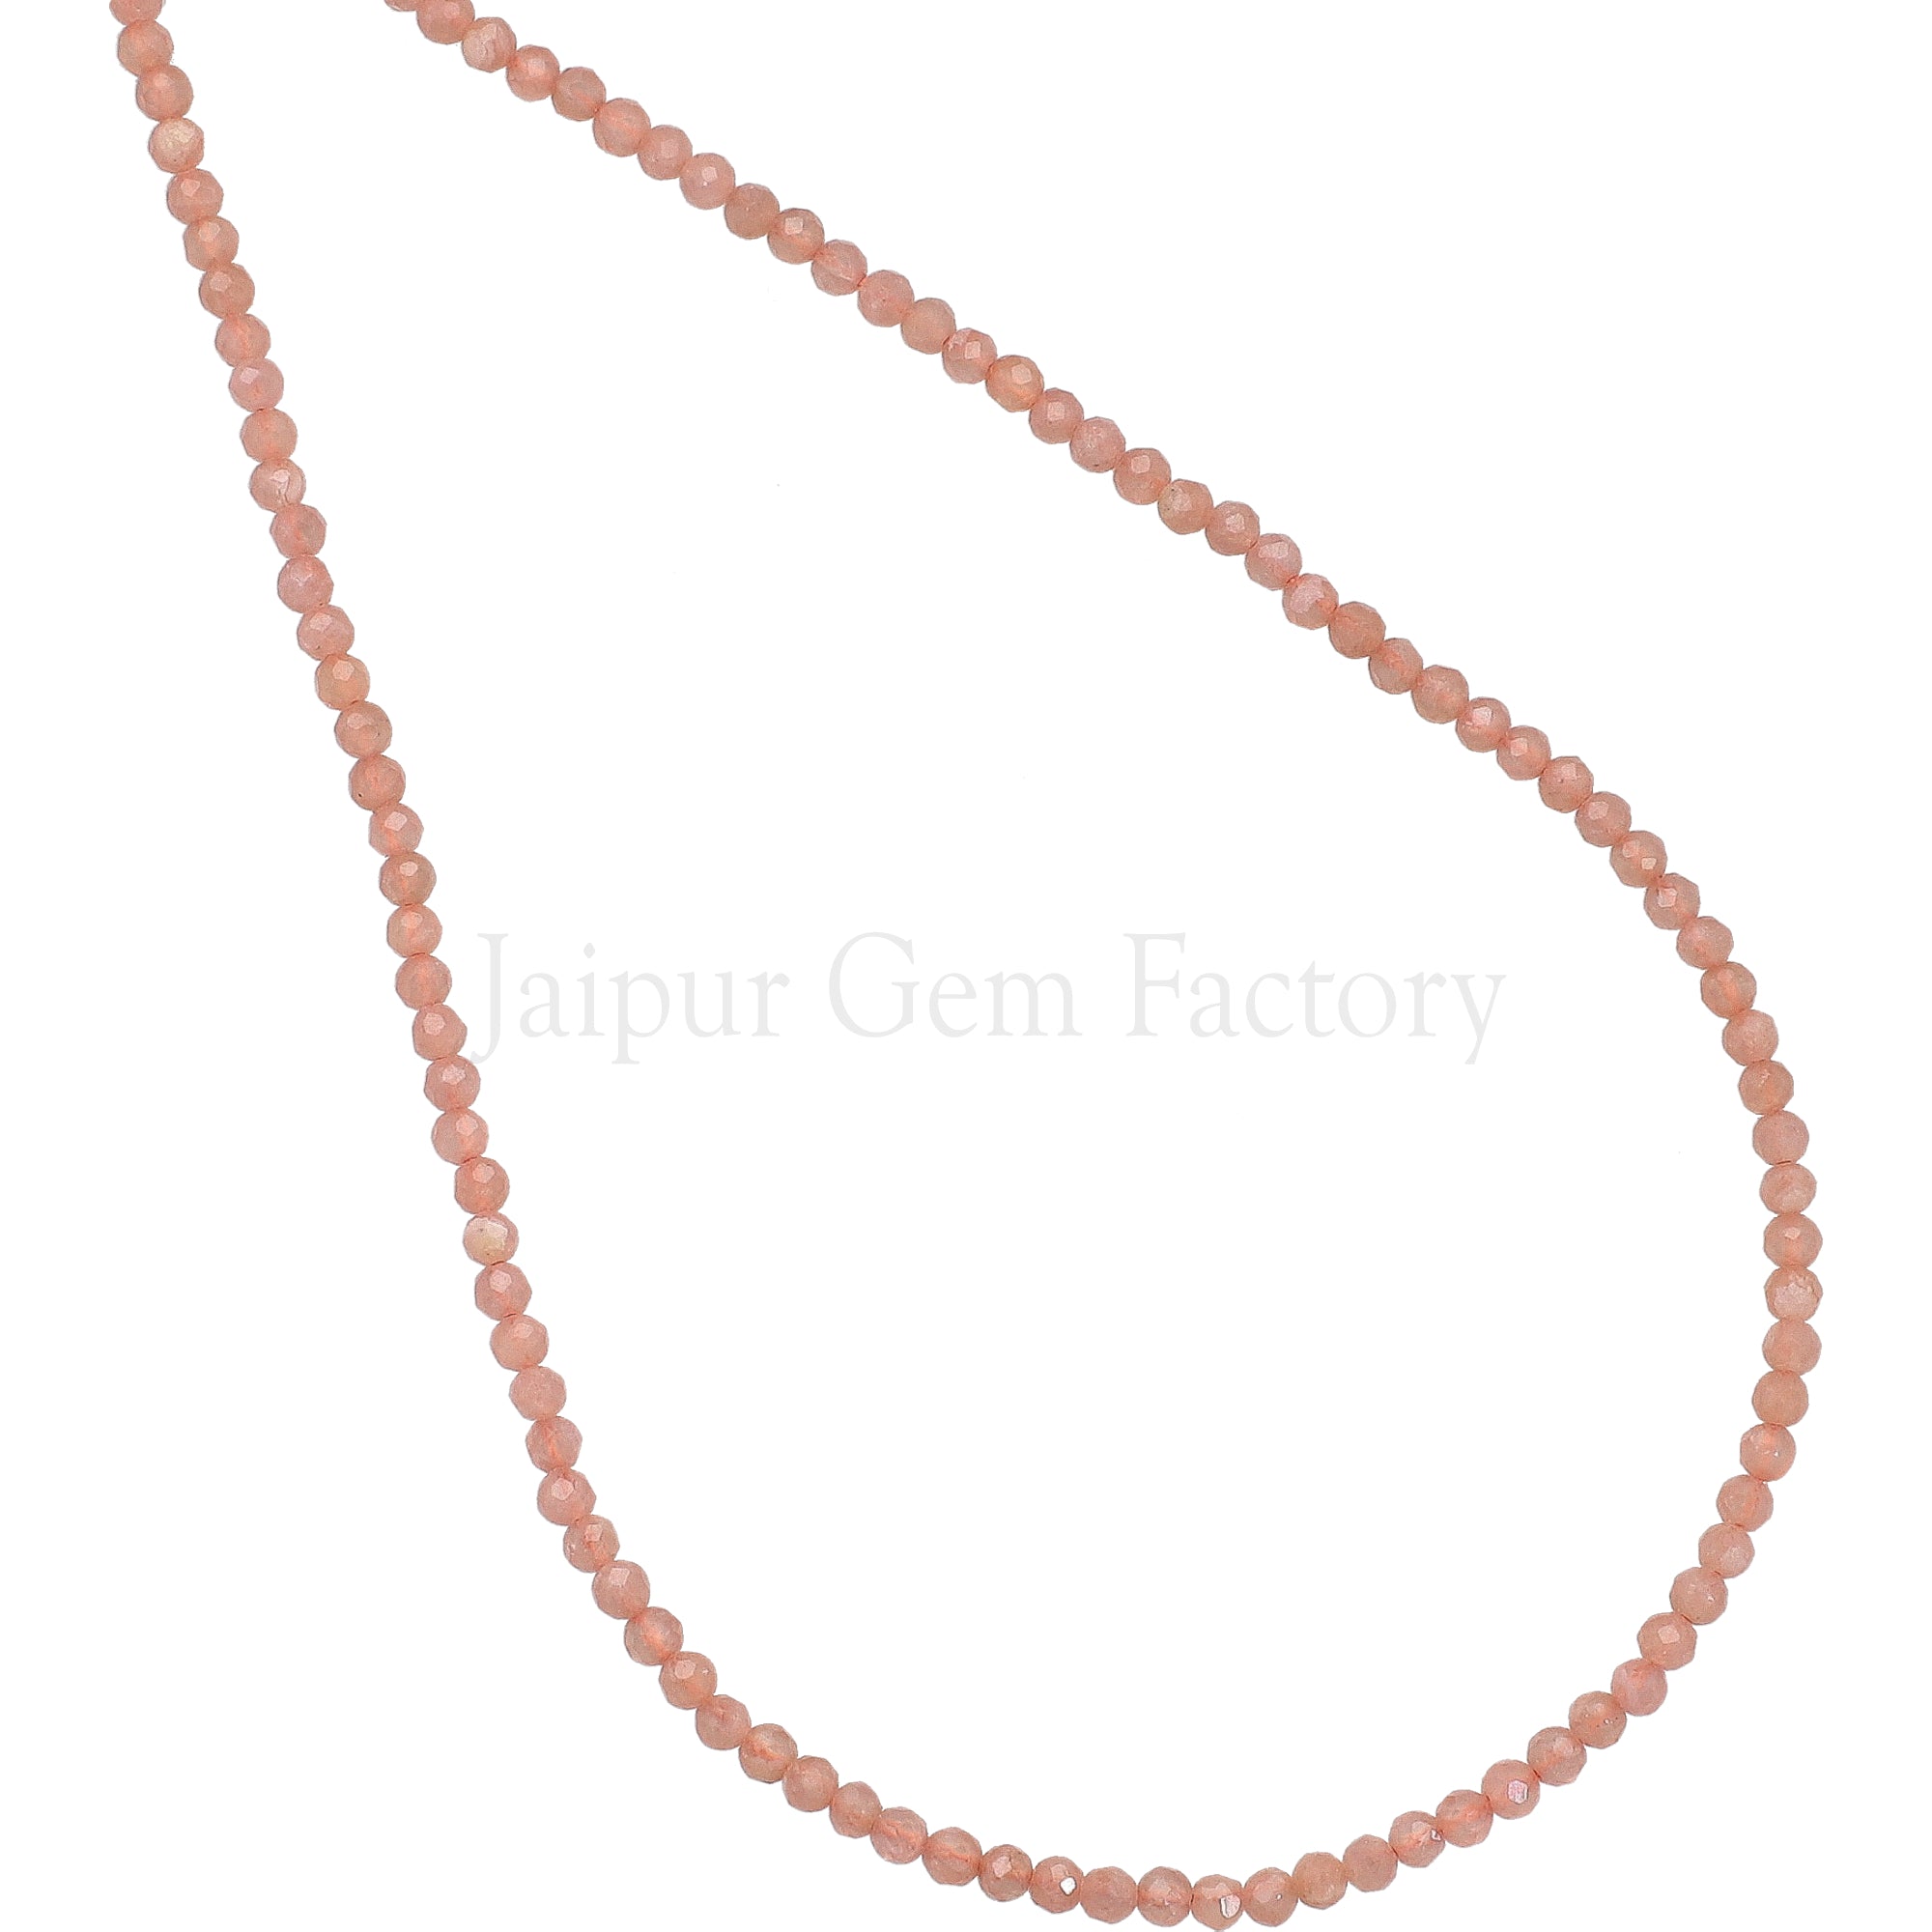 2-2.5 MM Peach Moonstone Faceted Round Beads